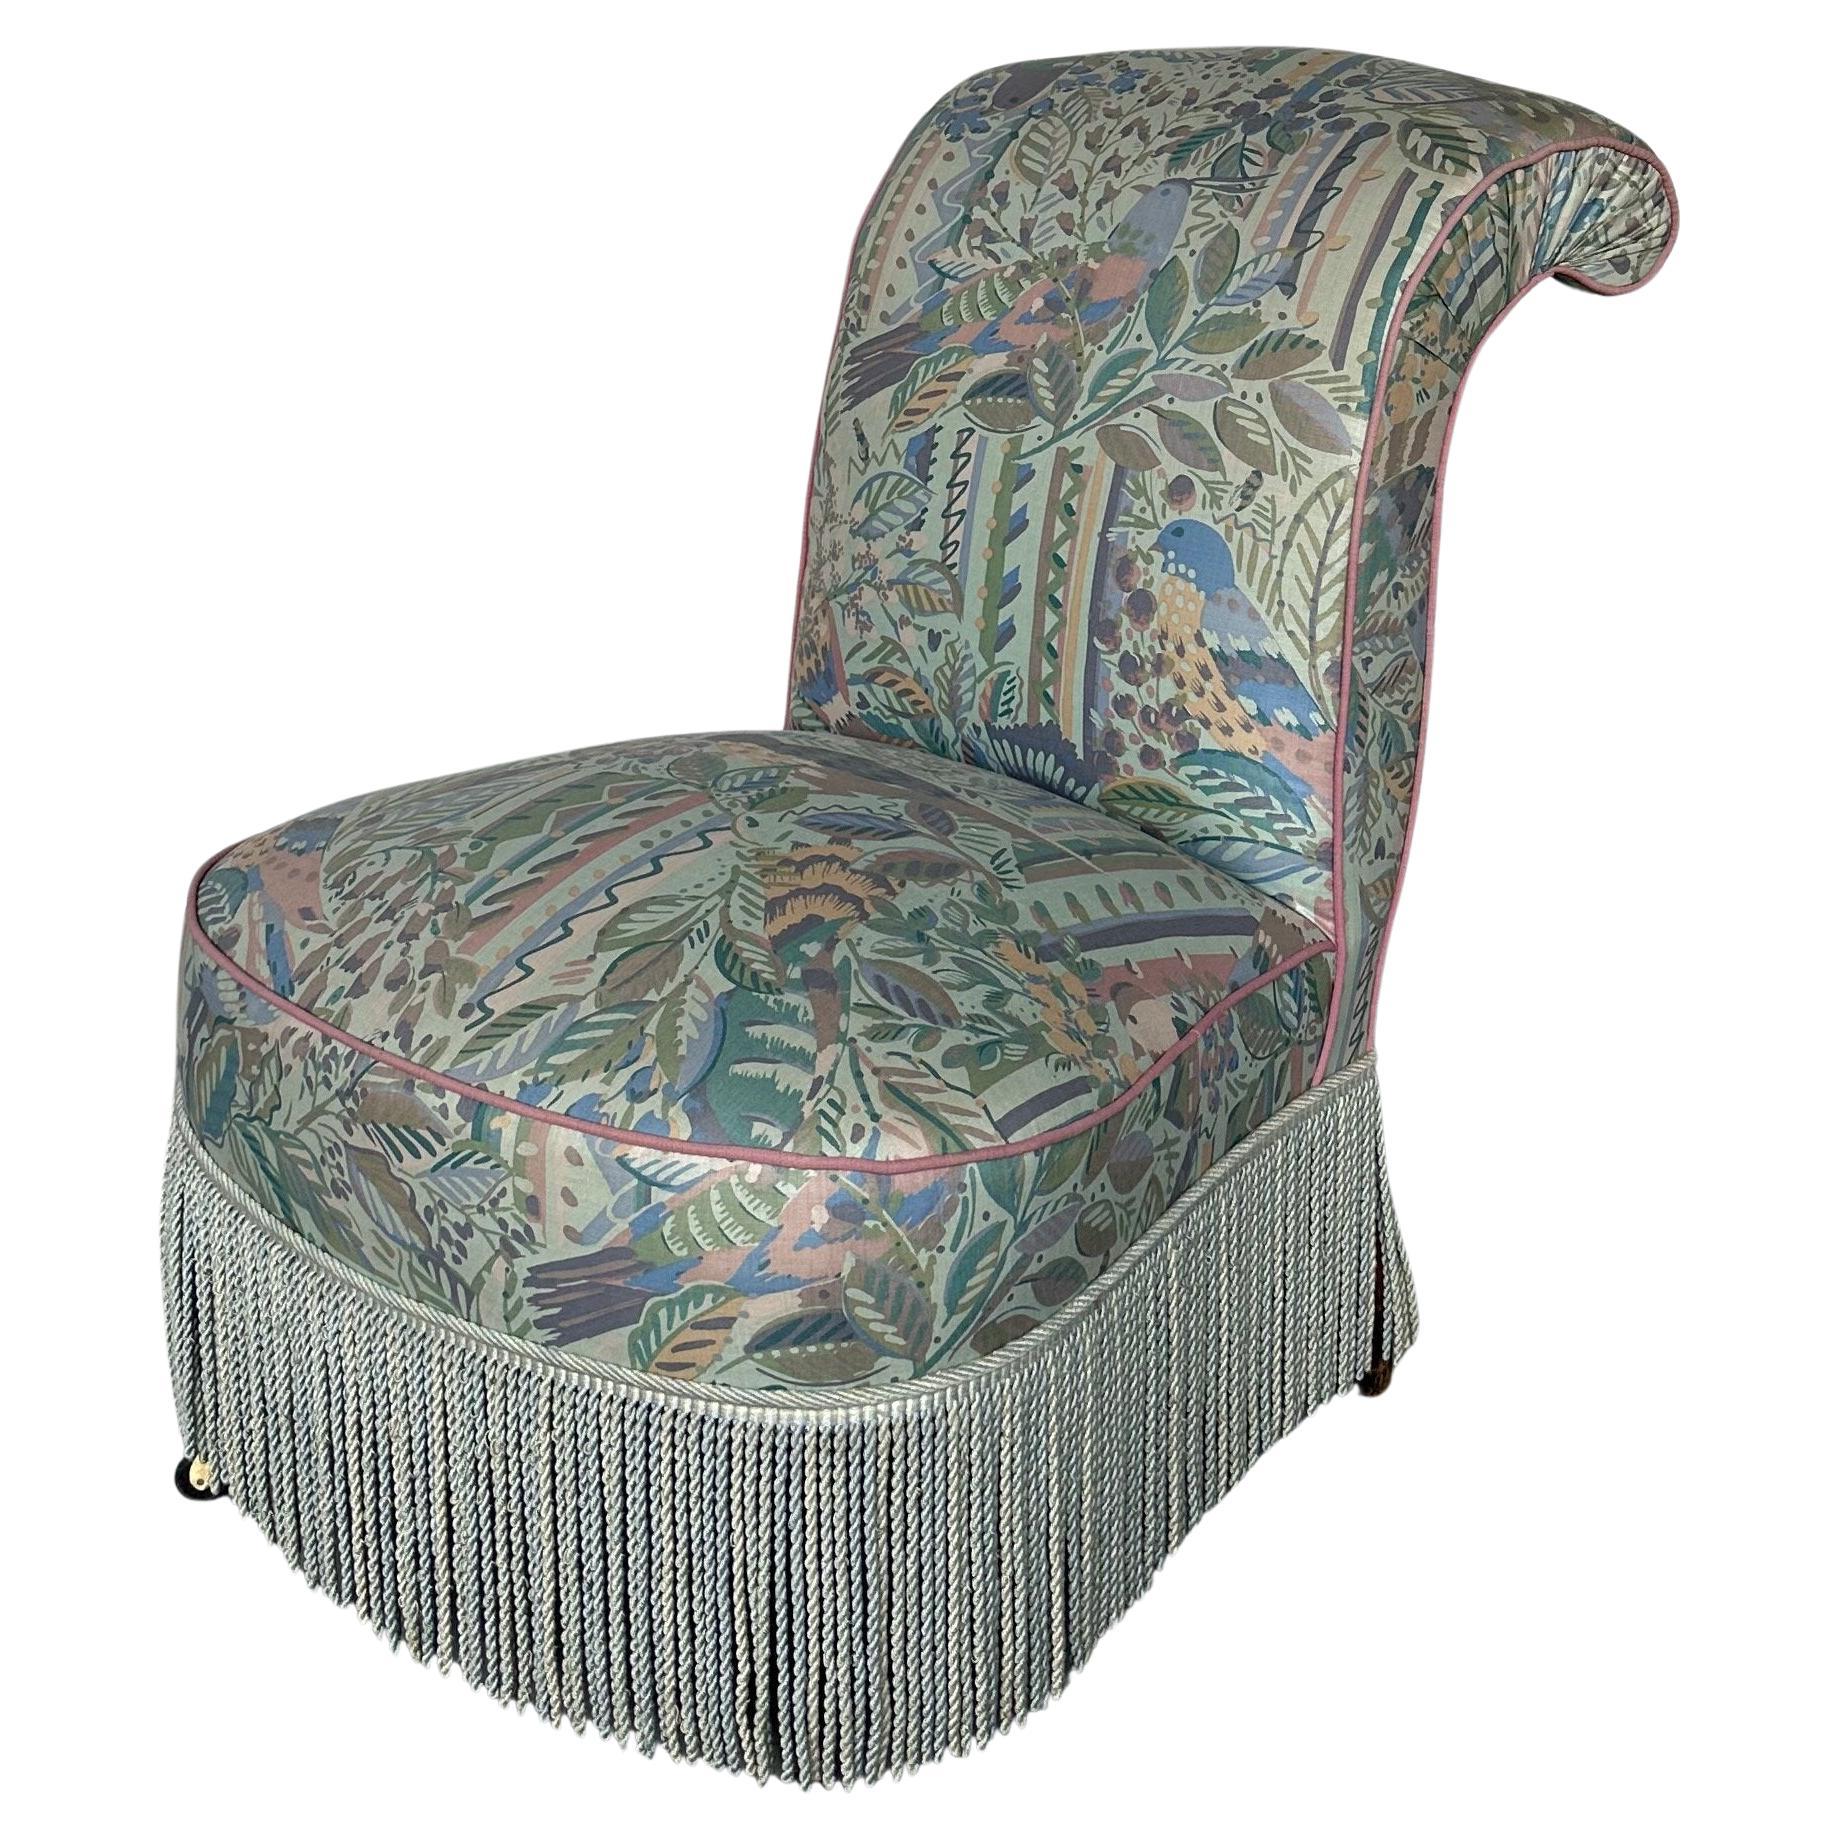 French Scrolled Back Napoleon III Slipper Chair with Fringe For Sale